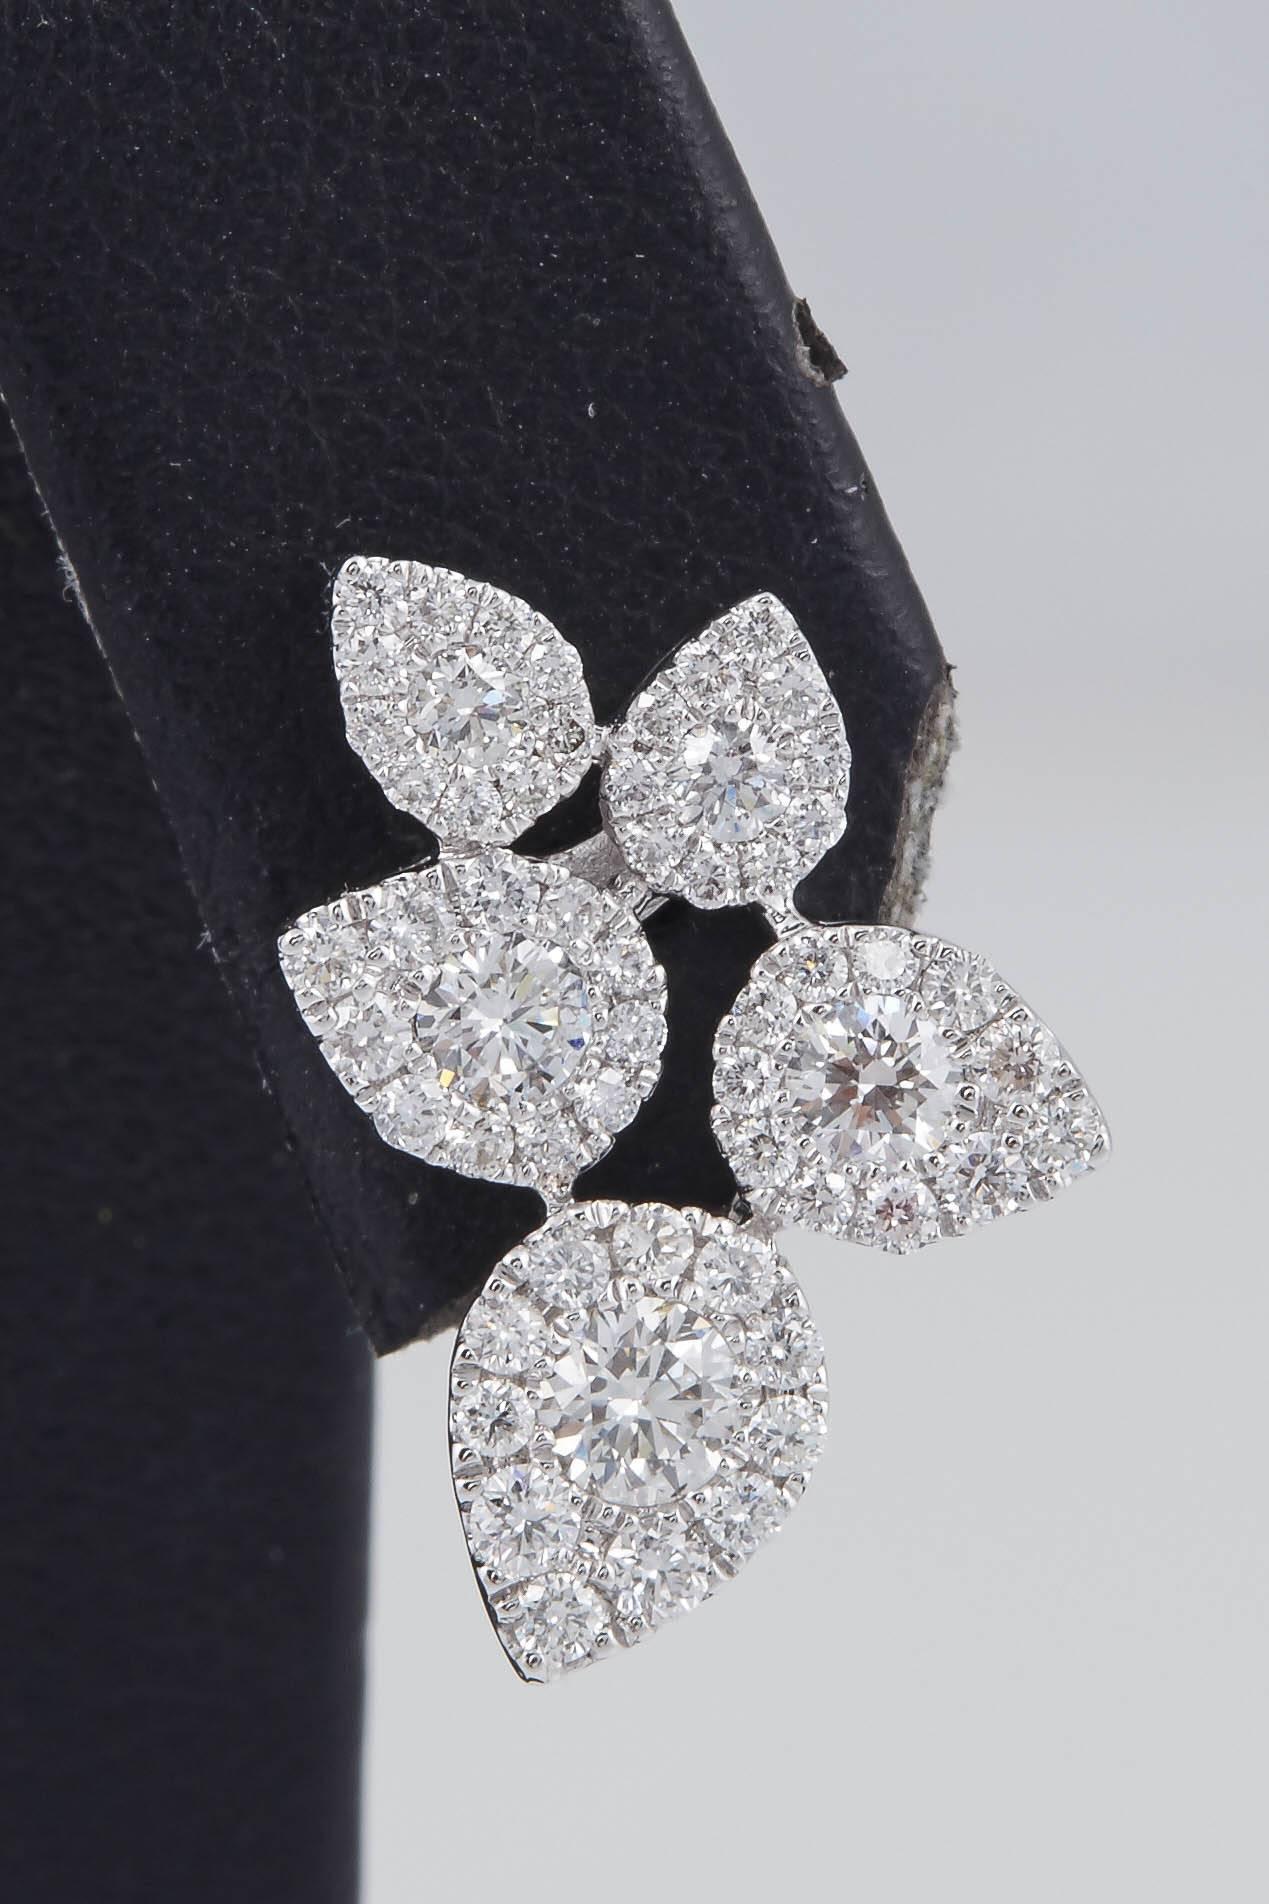 18K White Gold 
10 Rounds 0.65 Carats
106 Rounds Diamonds 0.63 cts.